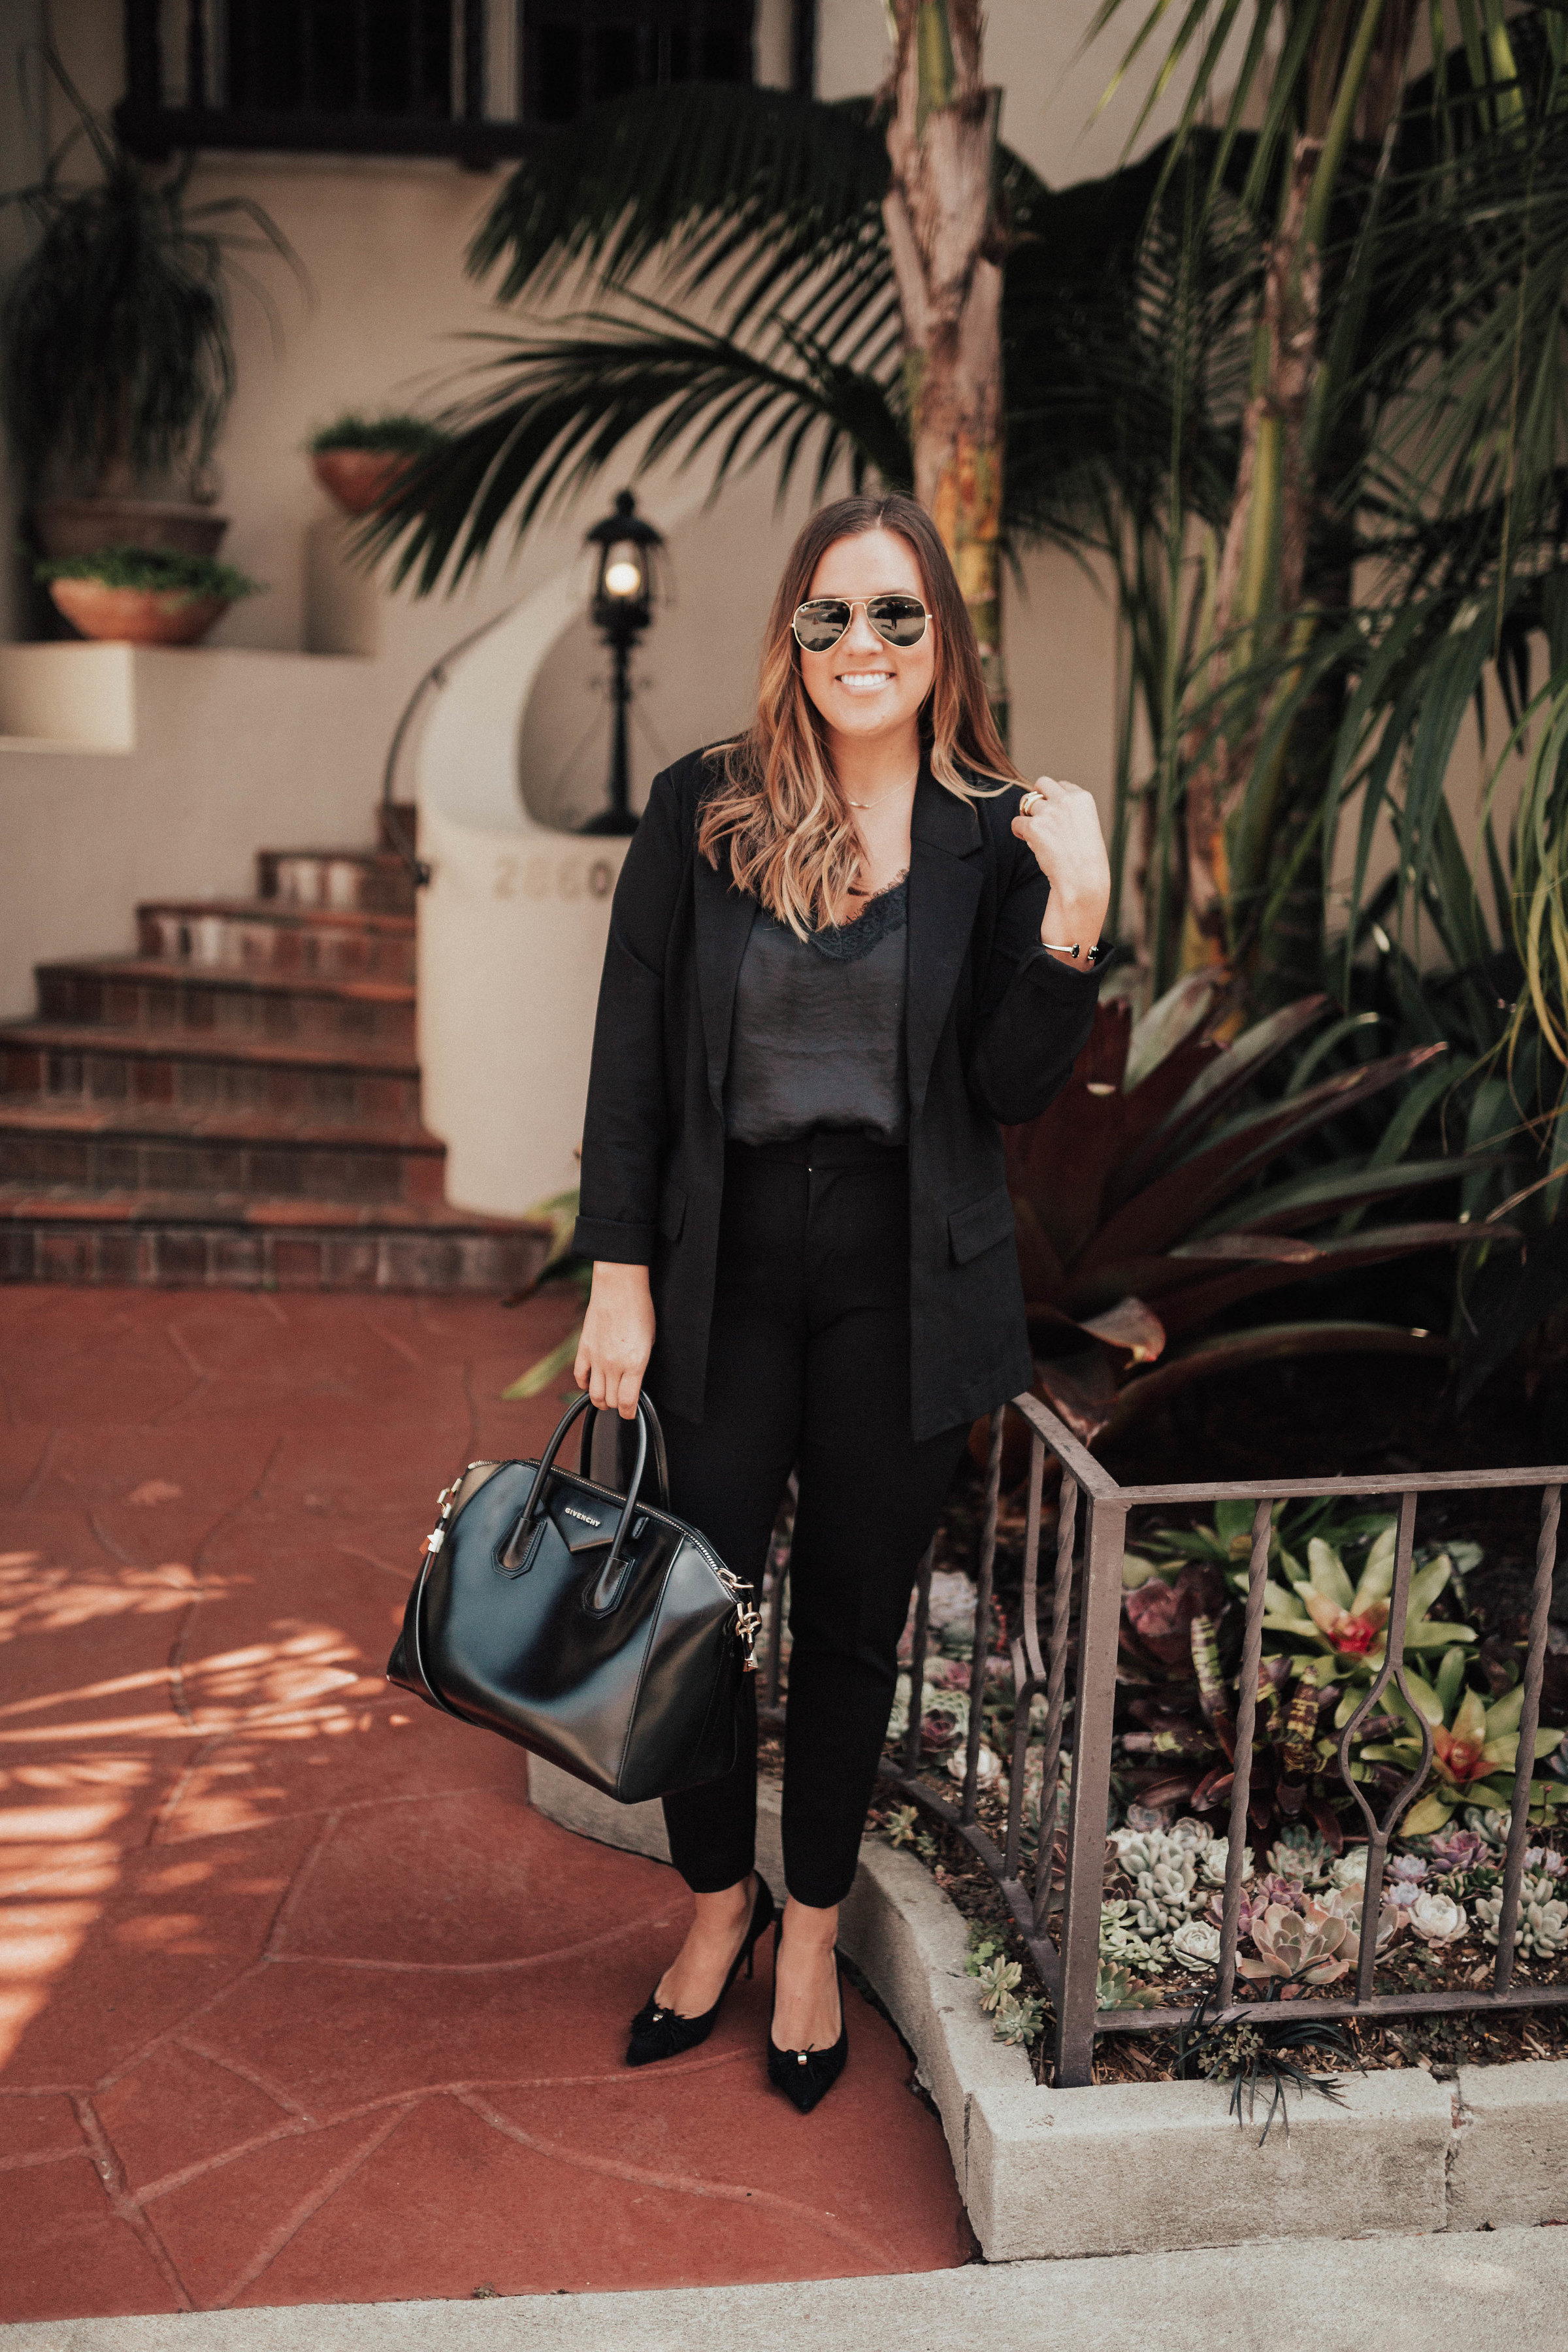 Ashley Zeal from Two Peas in a Prada shares a versatile workwear look. She is wearing separates by Liverpool, available online and in stores at Bloomingdales.